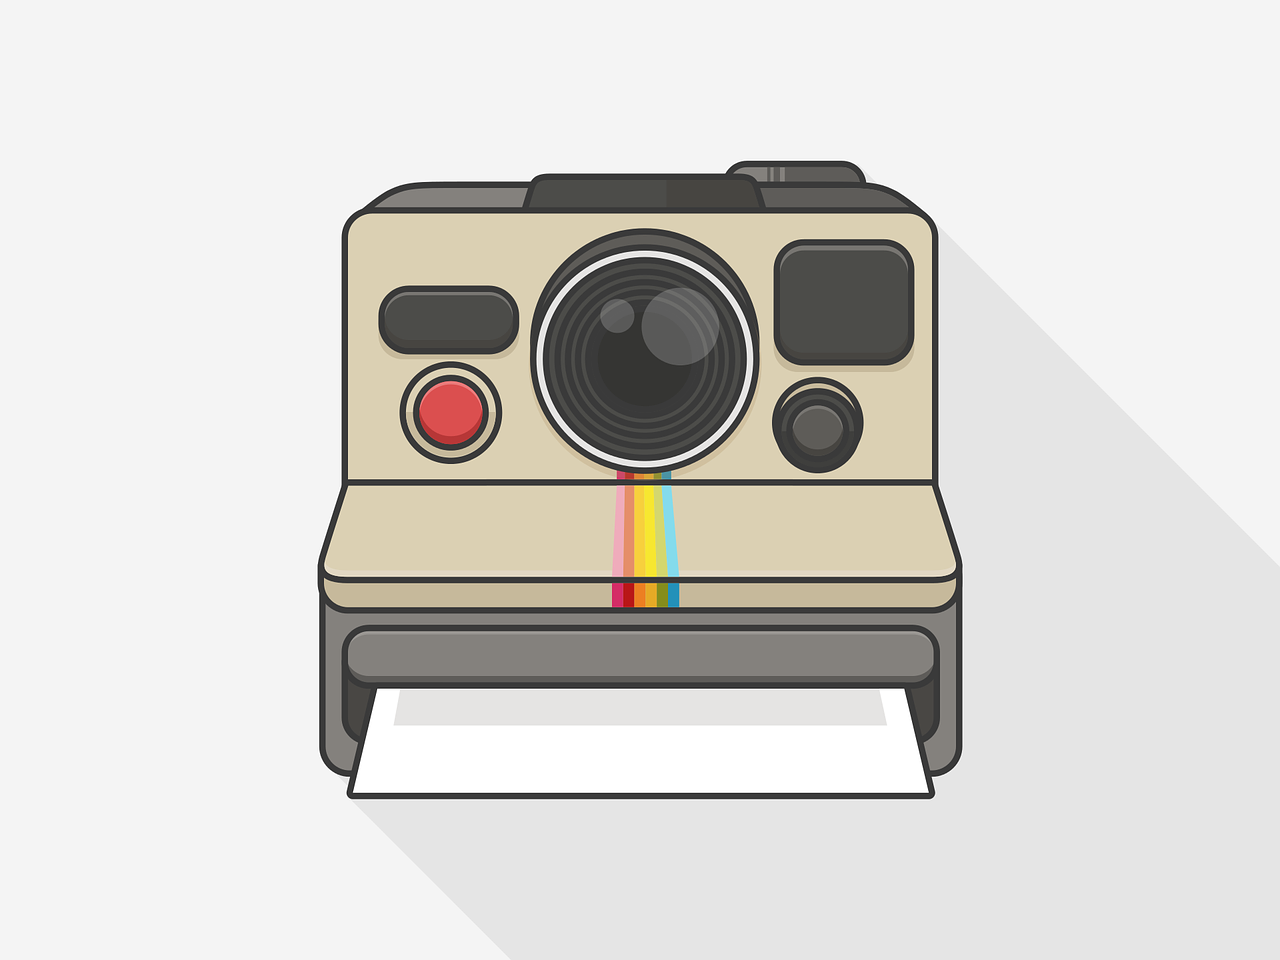 A polaroid camera representing Instagram, posted to: 